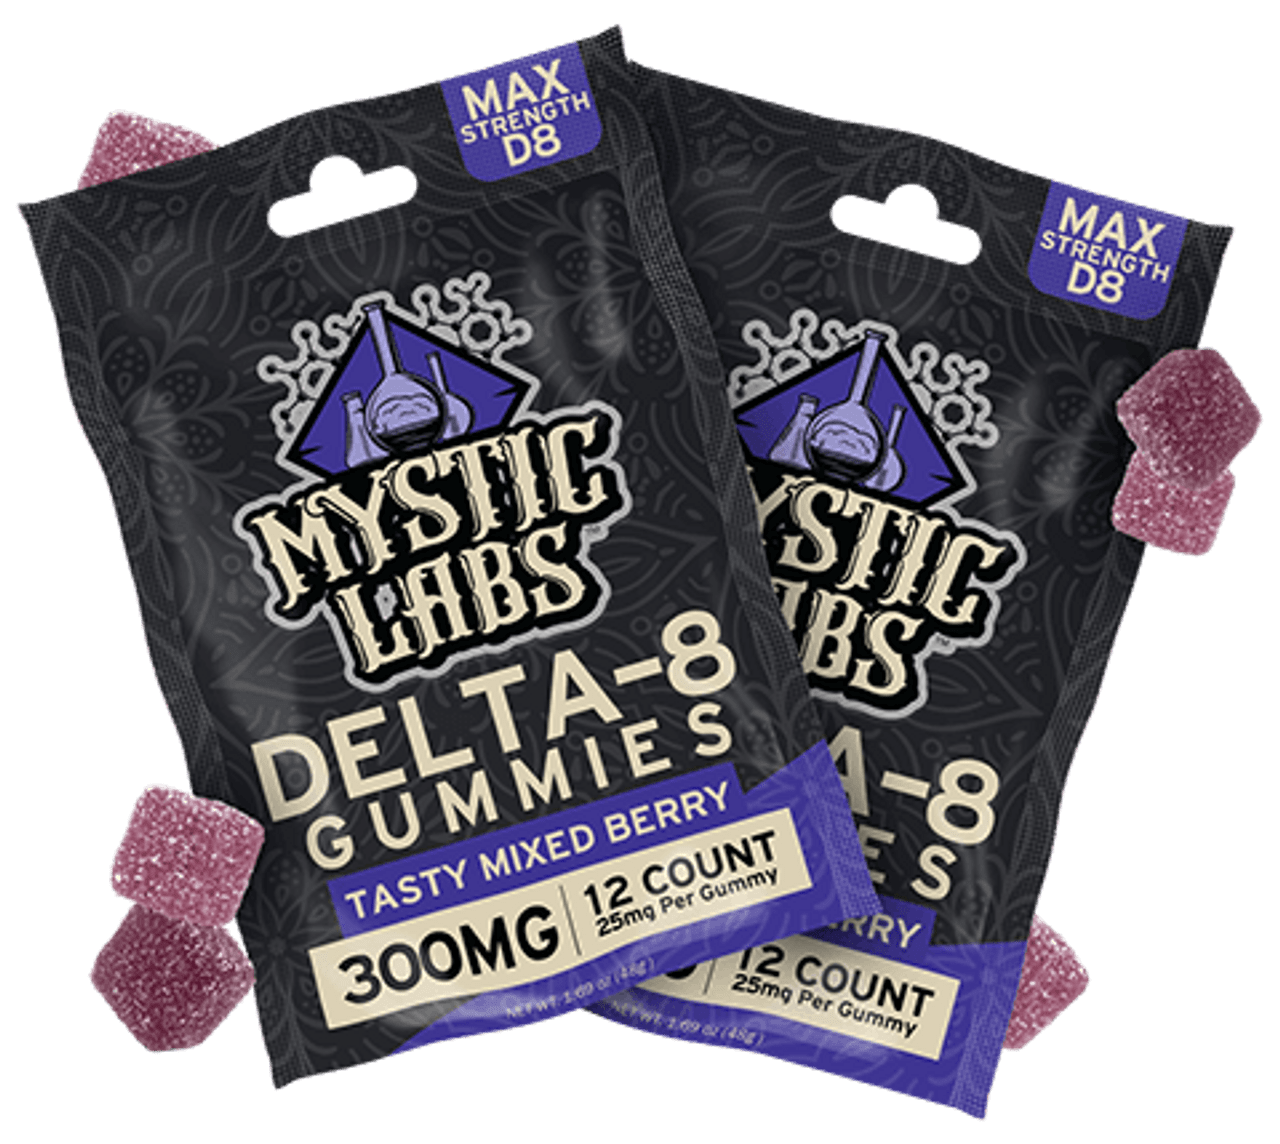 Delta 8 THC Gummies Online Sofia, Buy Cannabis Online Sofia, Strong THC Vape Juice Online Bulgaria, Order From Us And Get The Best Of High.